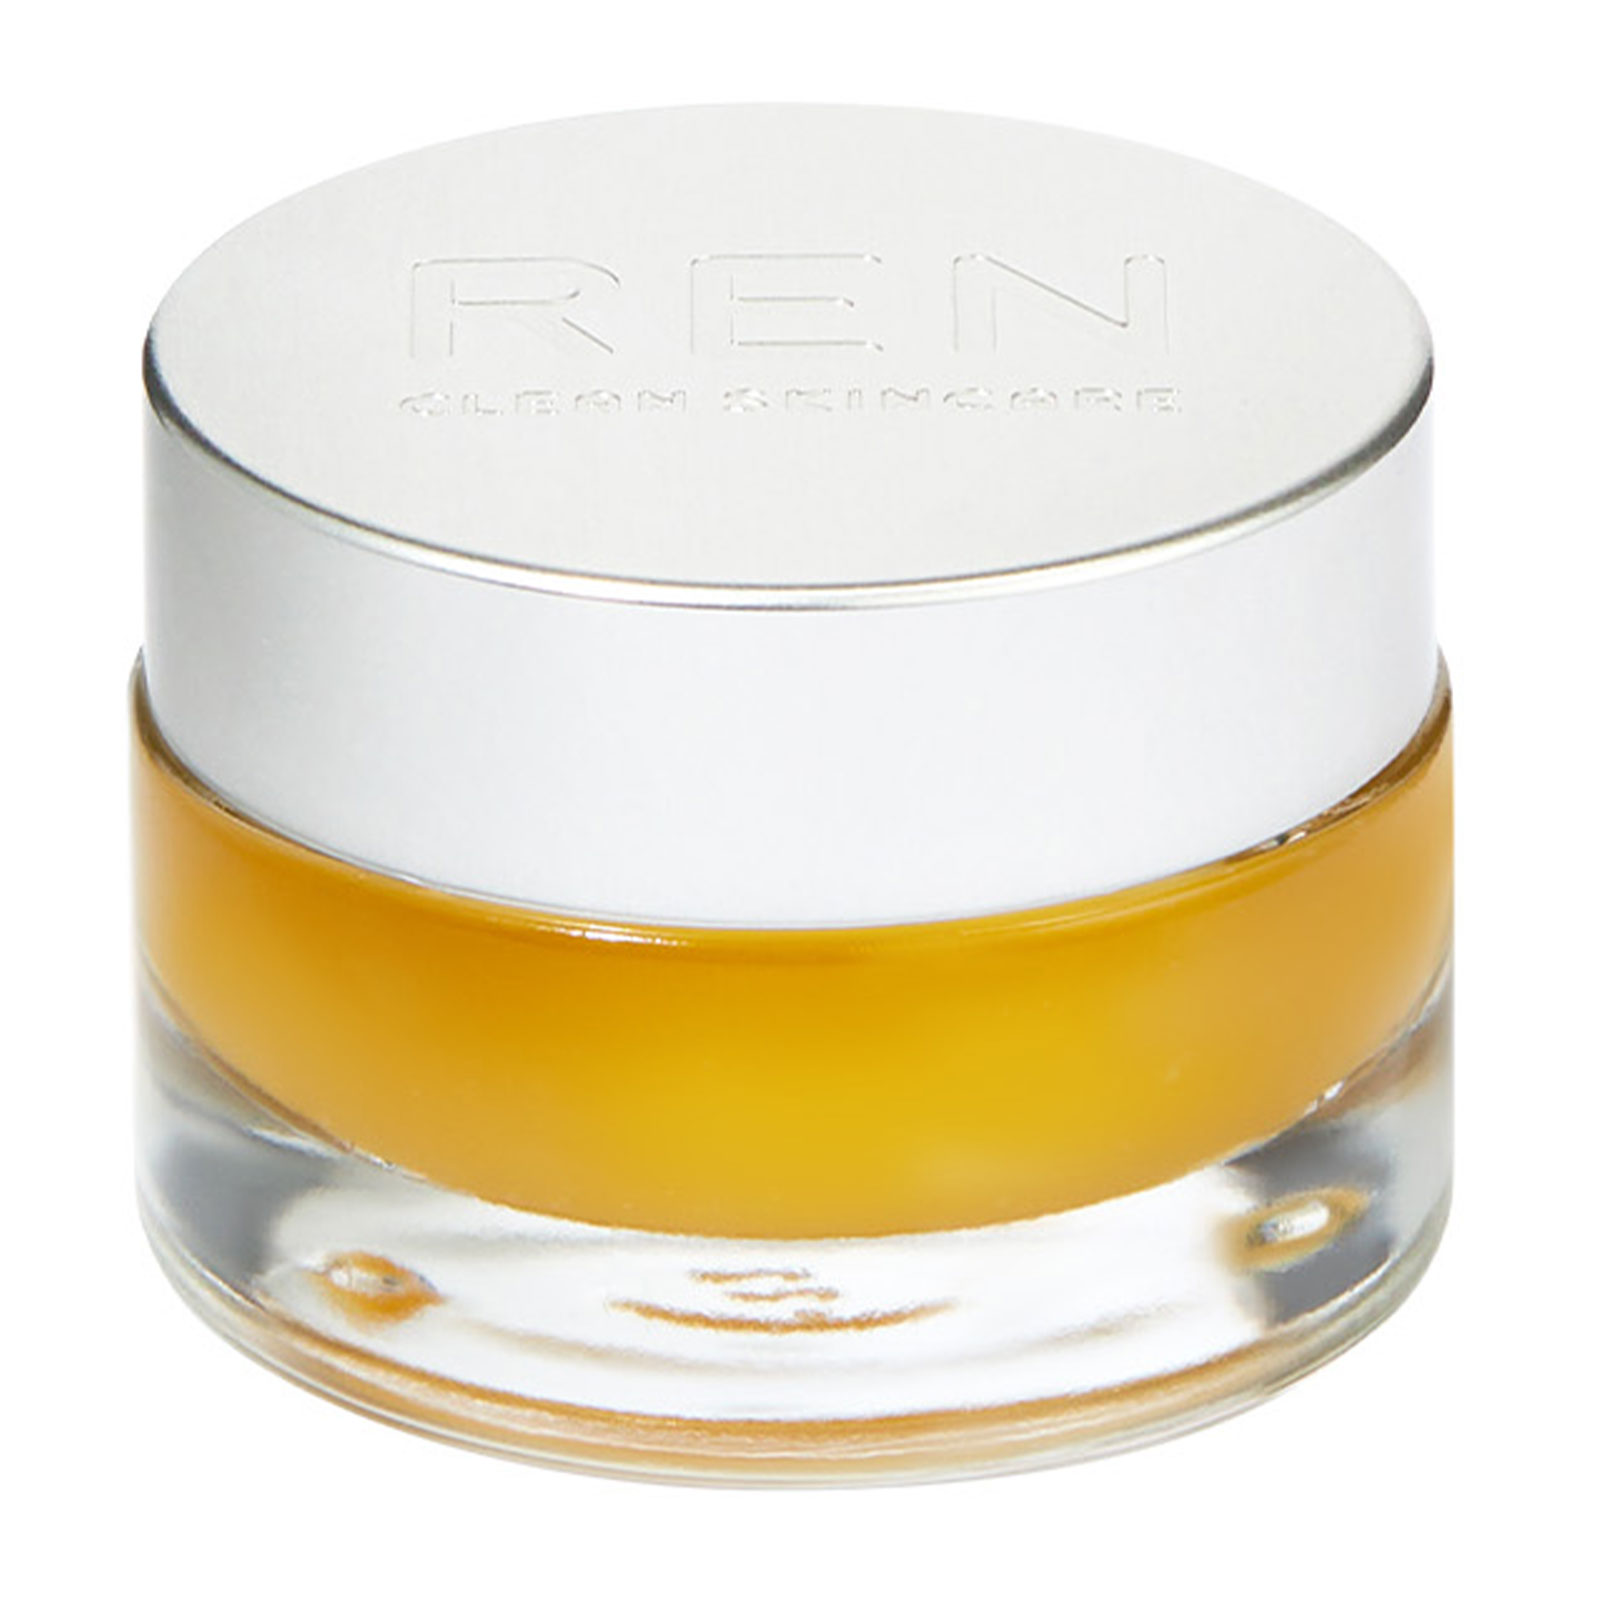 Ren Clean Skincare Glycol Lactic Radiance Renewal Mask 15Ml